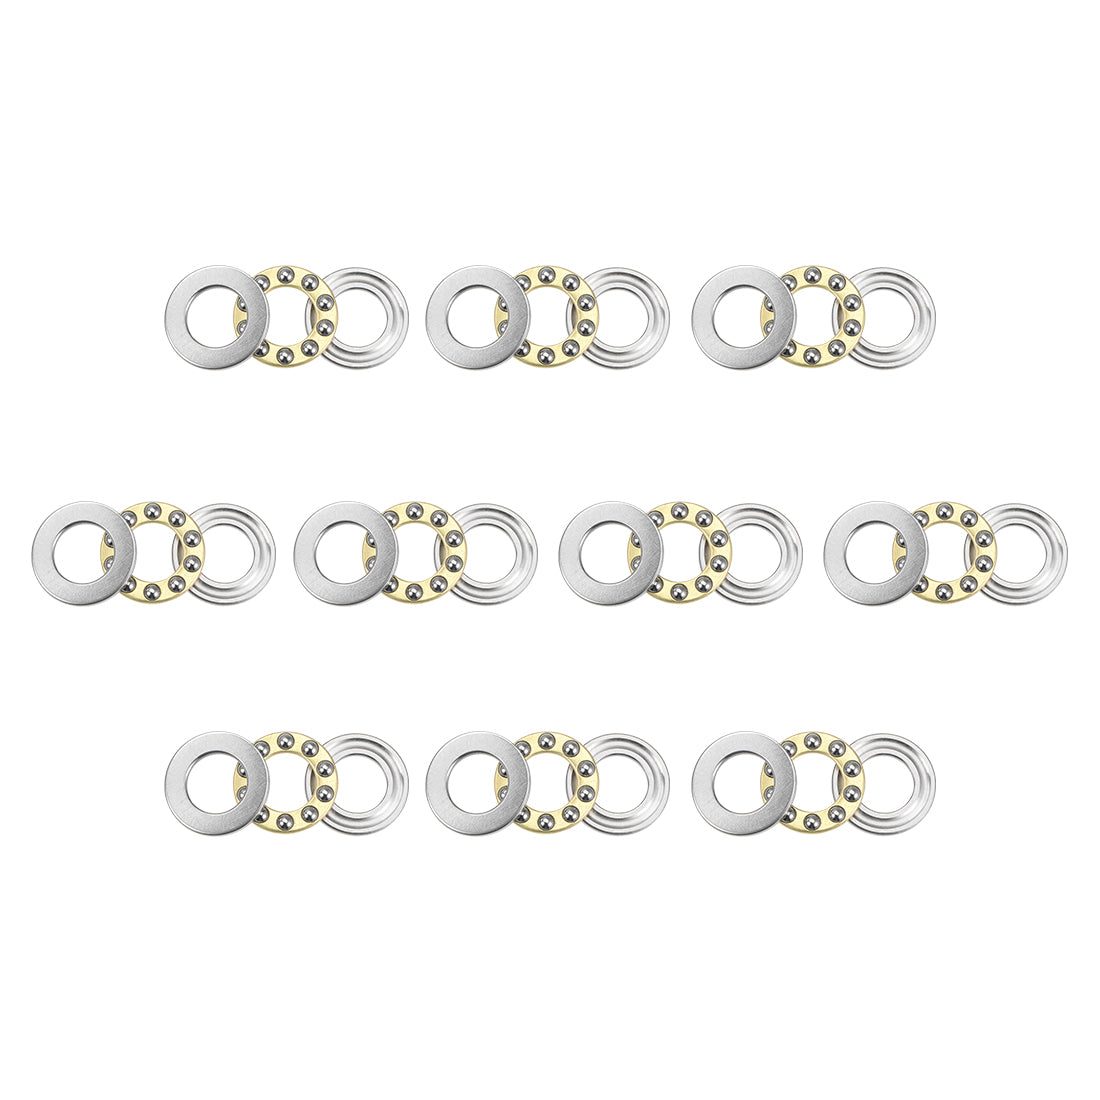 uxcell Uxcell F10-18M Miniature Thrust Ball Bearing 10x18x5.5mm Chrome Steel with Washer 10Pcs